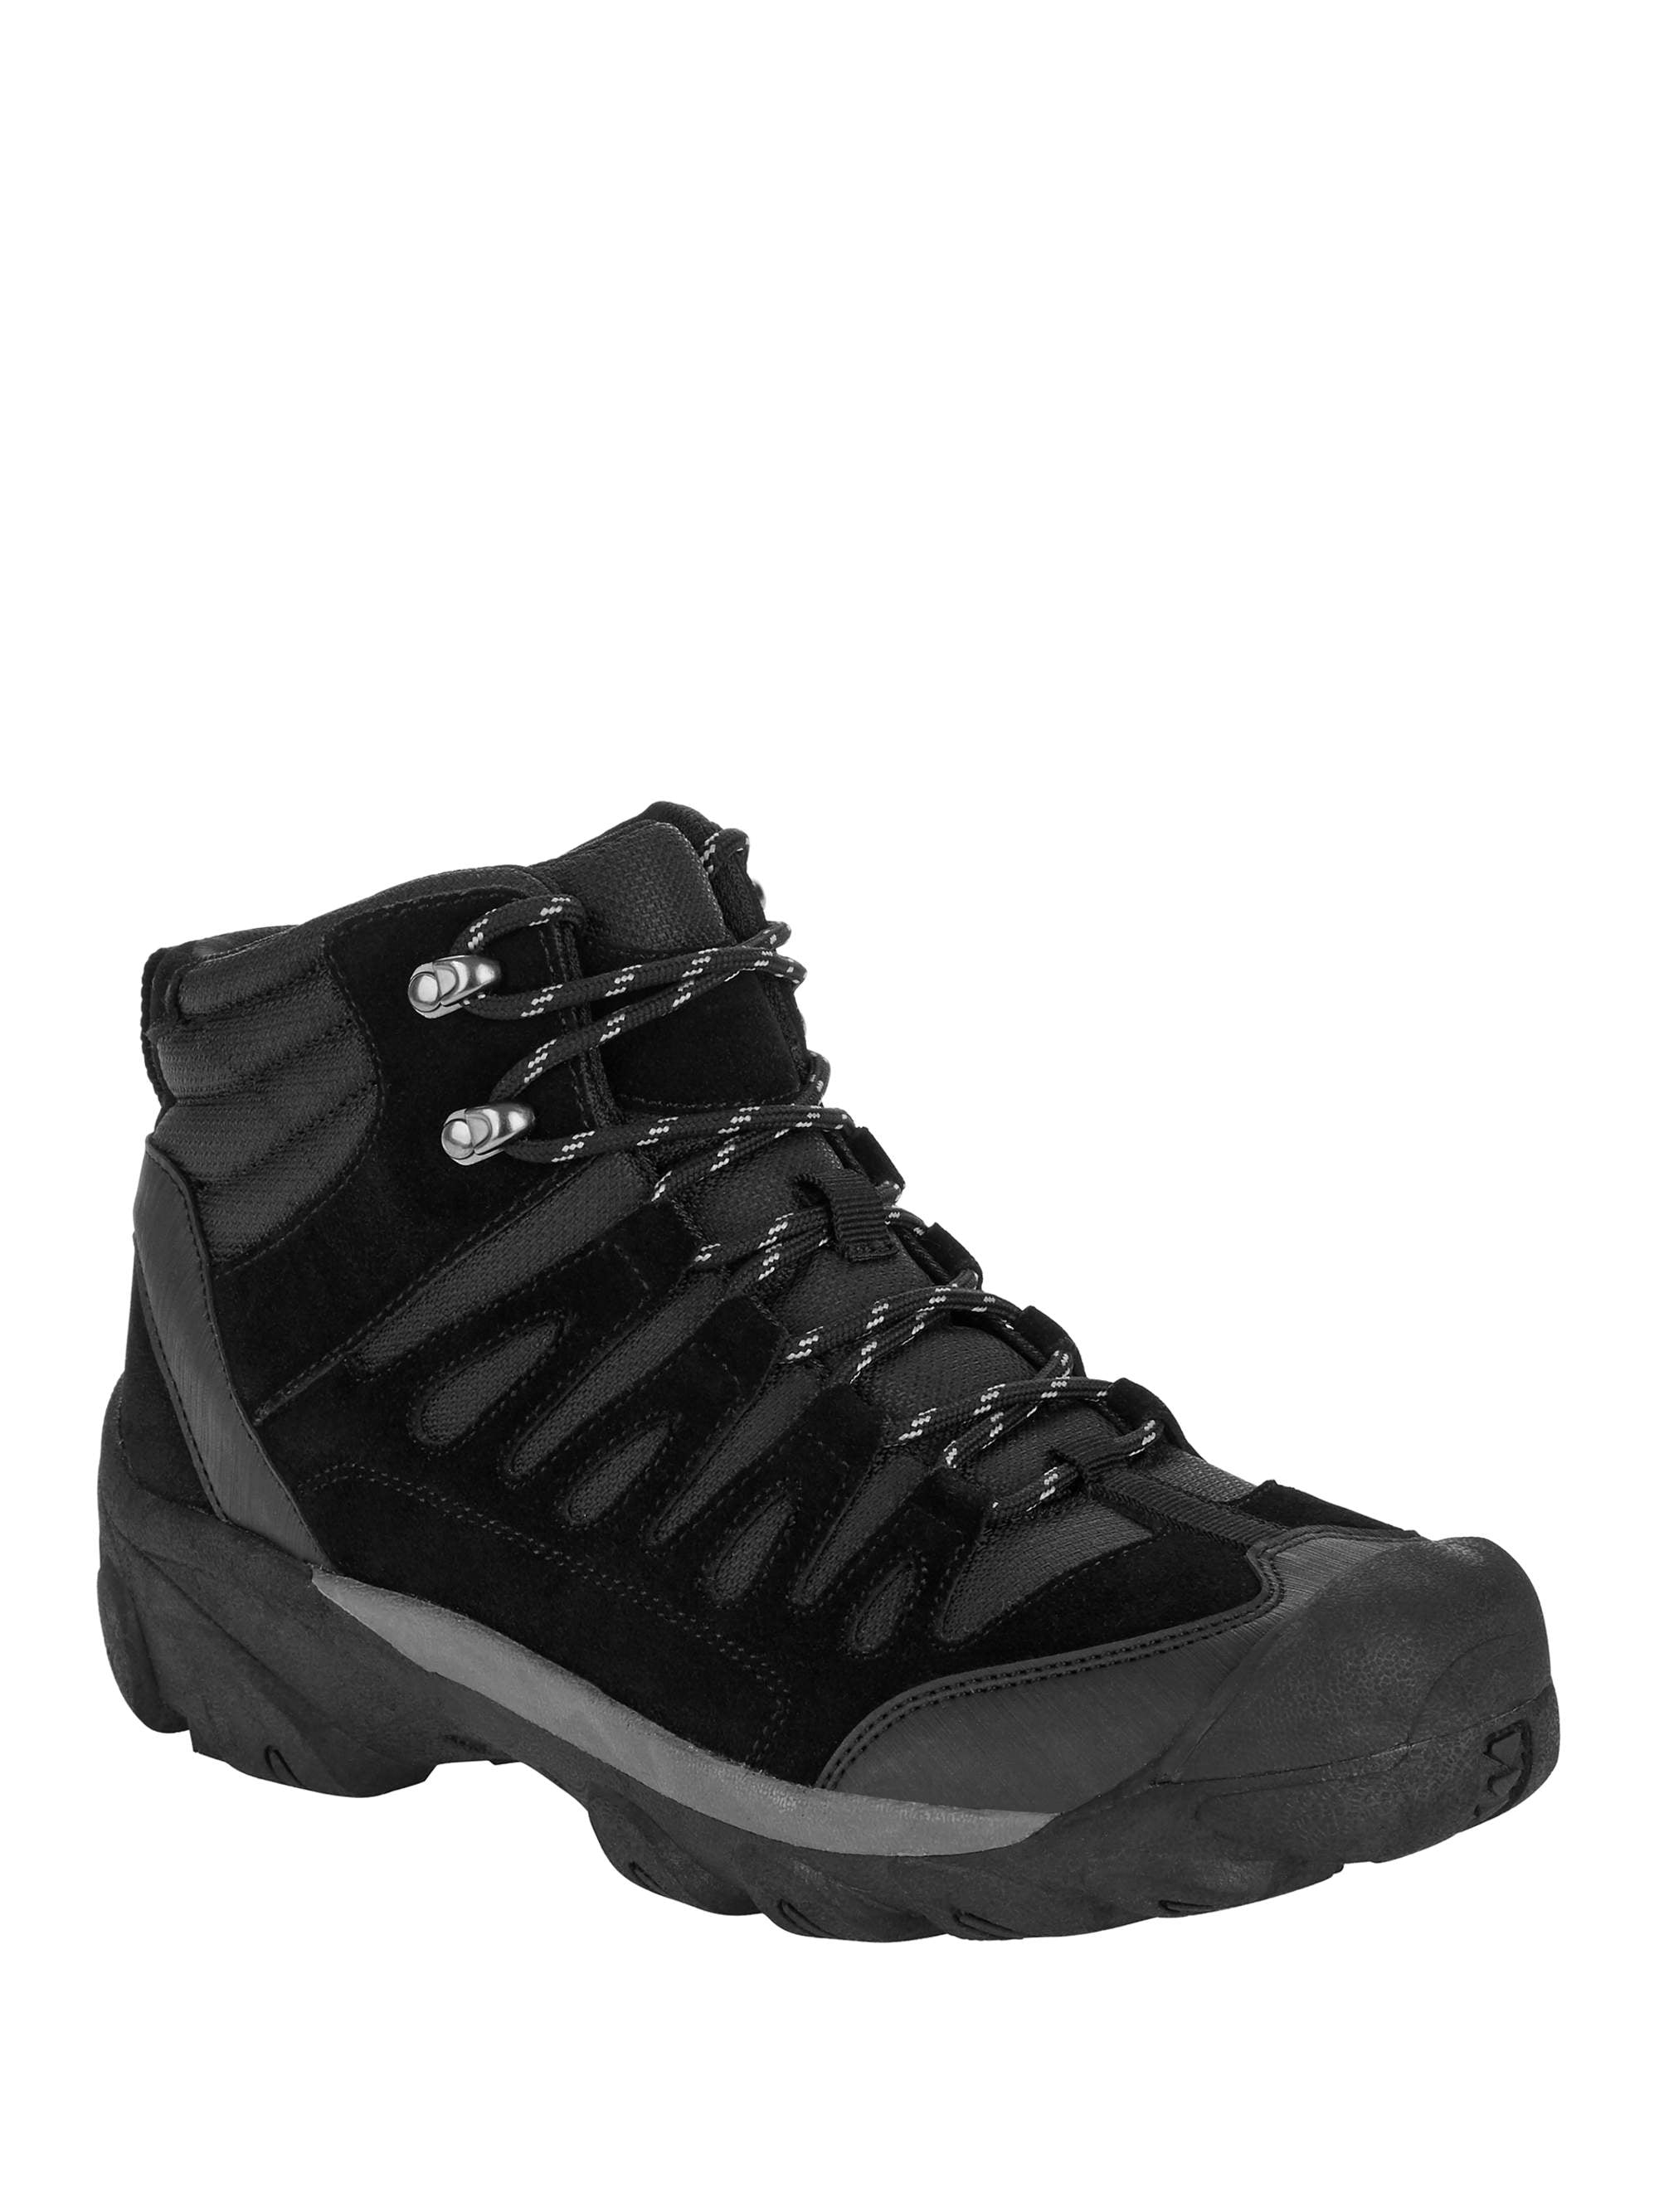 black leather hiking boots mens